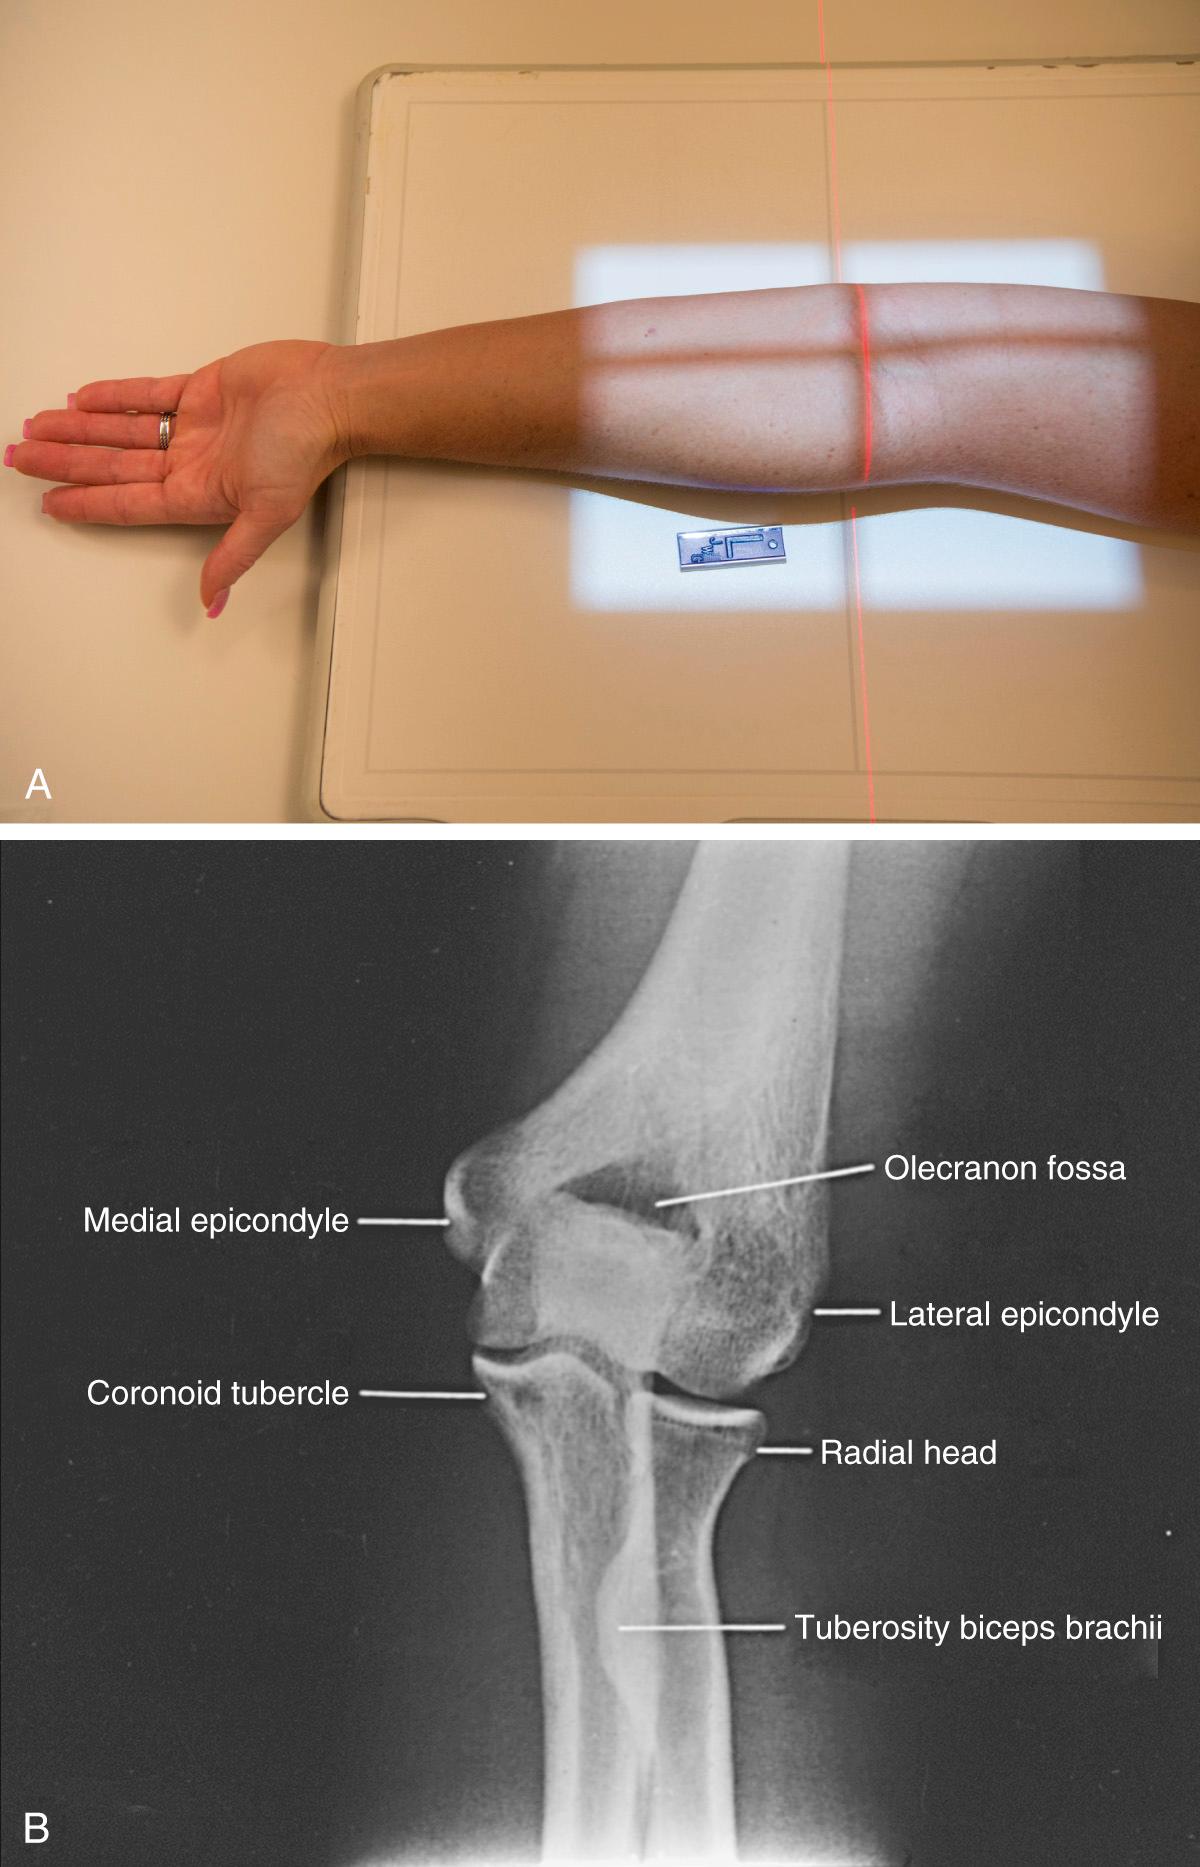 FIG 6.1, Anteroposterior (AP) view. (A) Elbow in position for the AP view. The arm is level with the cassette, with the hand positioned palm up. The x-ray beam is perpendicular to the elbow. (B) AP radiograph with anatomic labels.